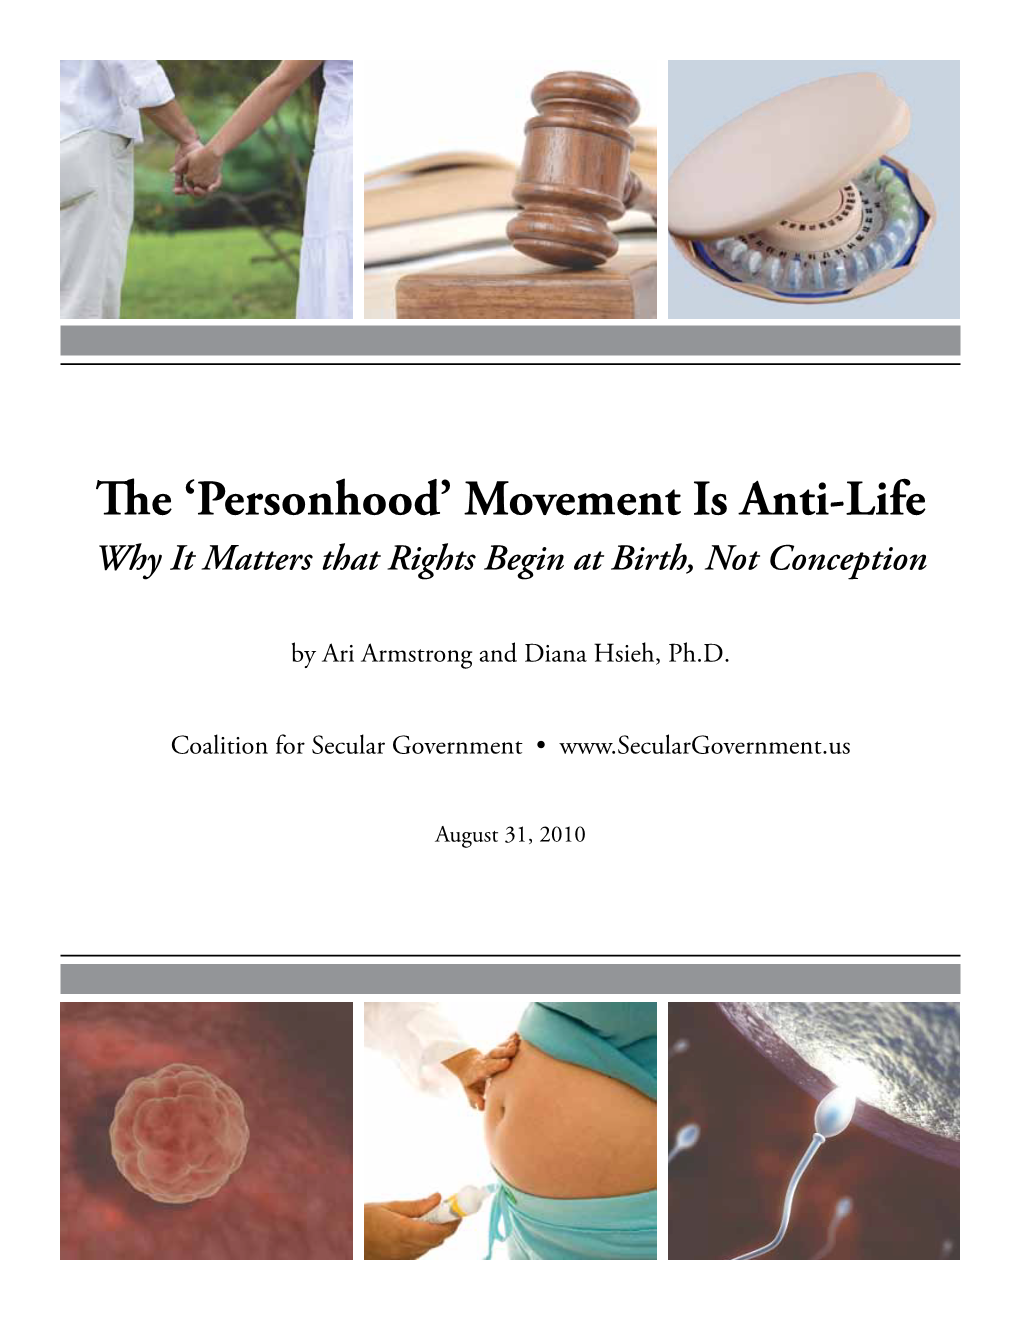 Personhood’ Movement Is Anti-Life Why It Matters That Rights Begin at Birth, Not Conception